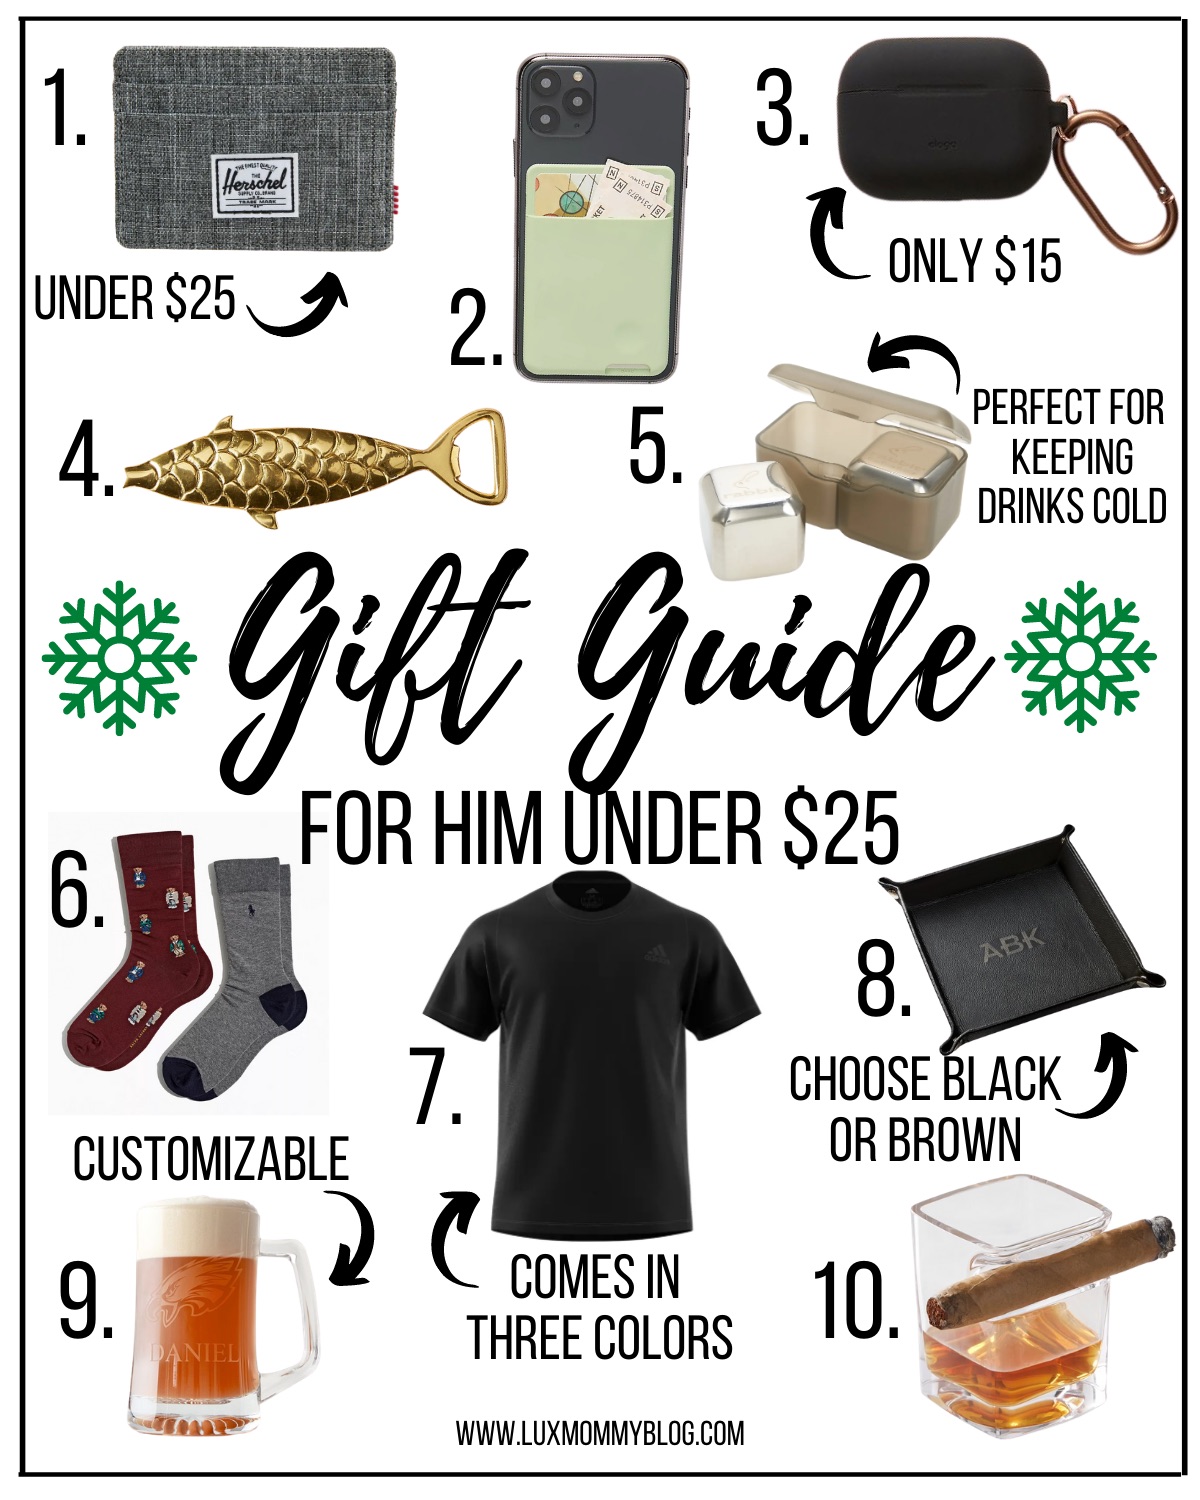 Gifts for Her $25 and Under - KMM Lifestyle